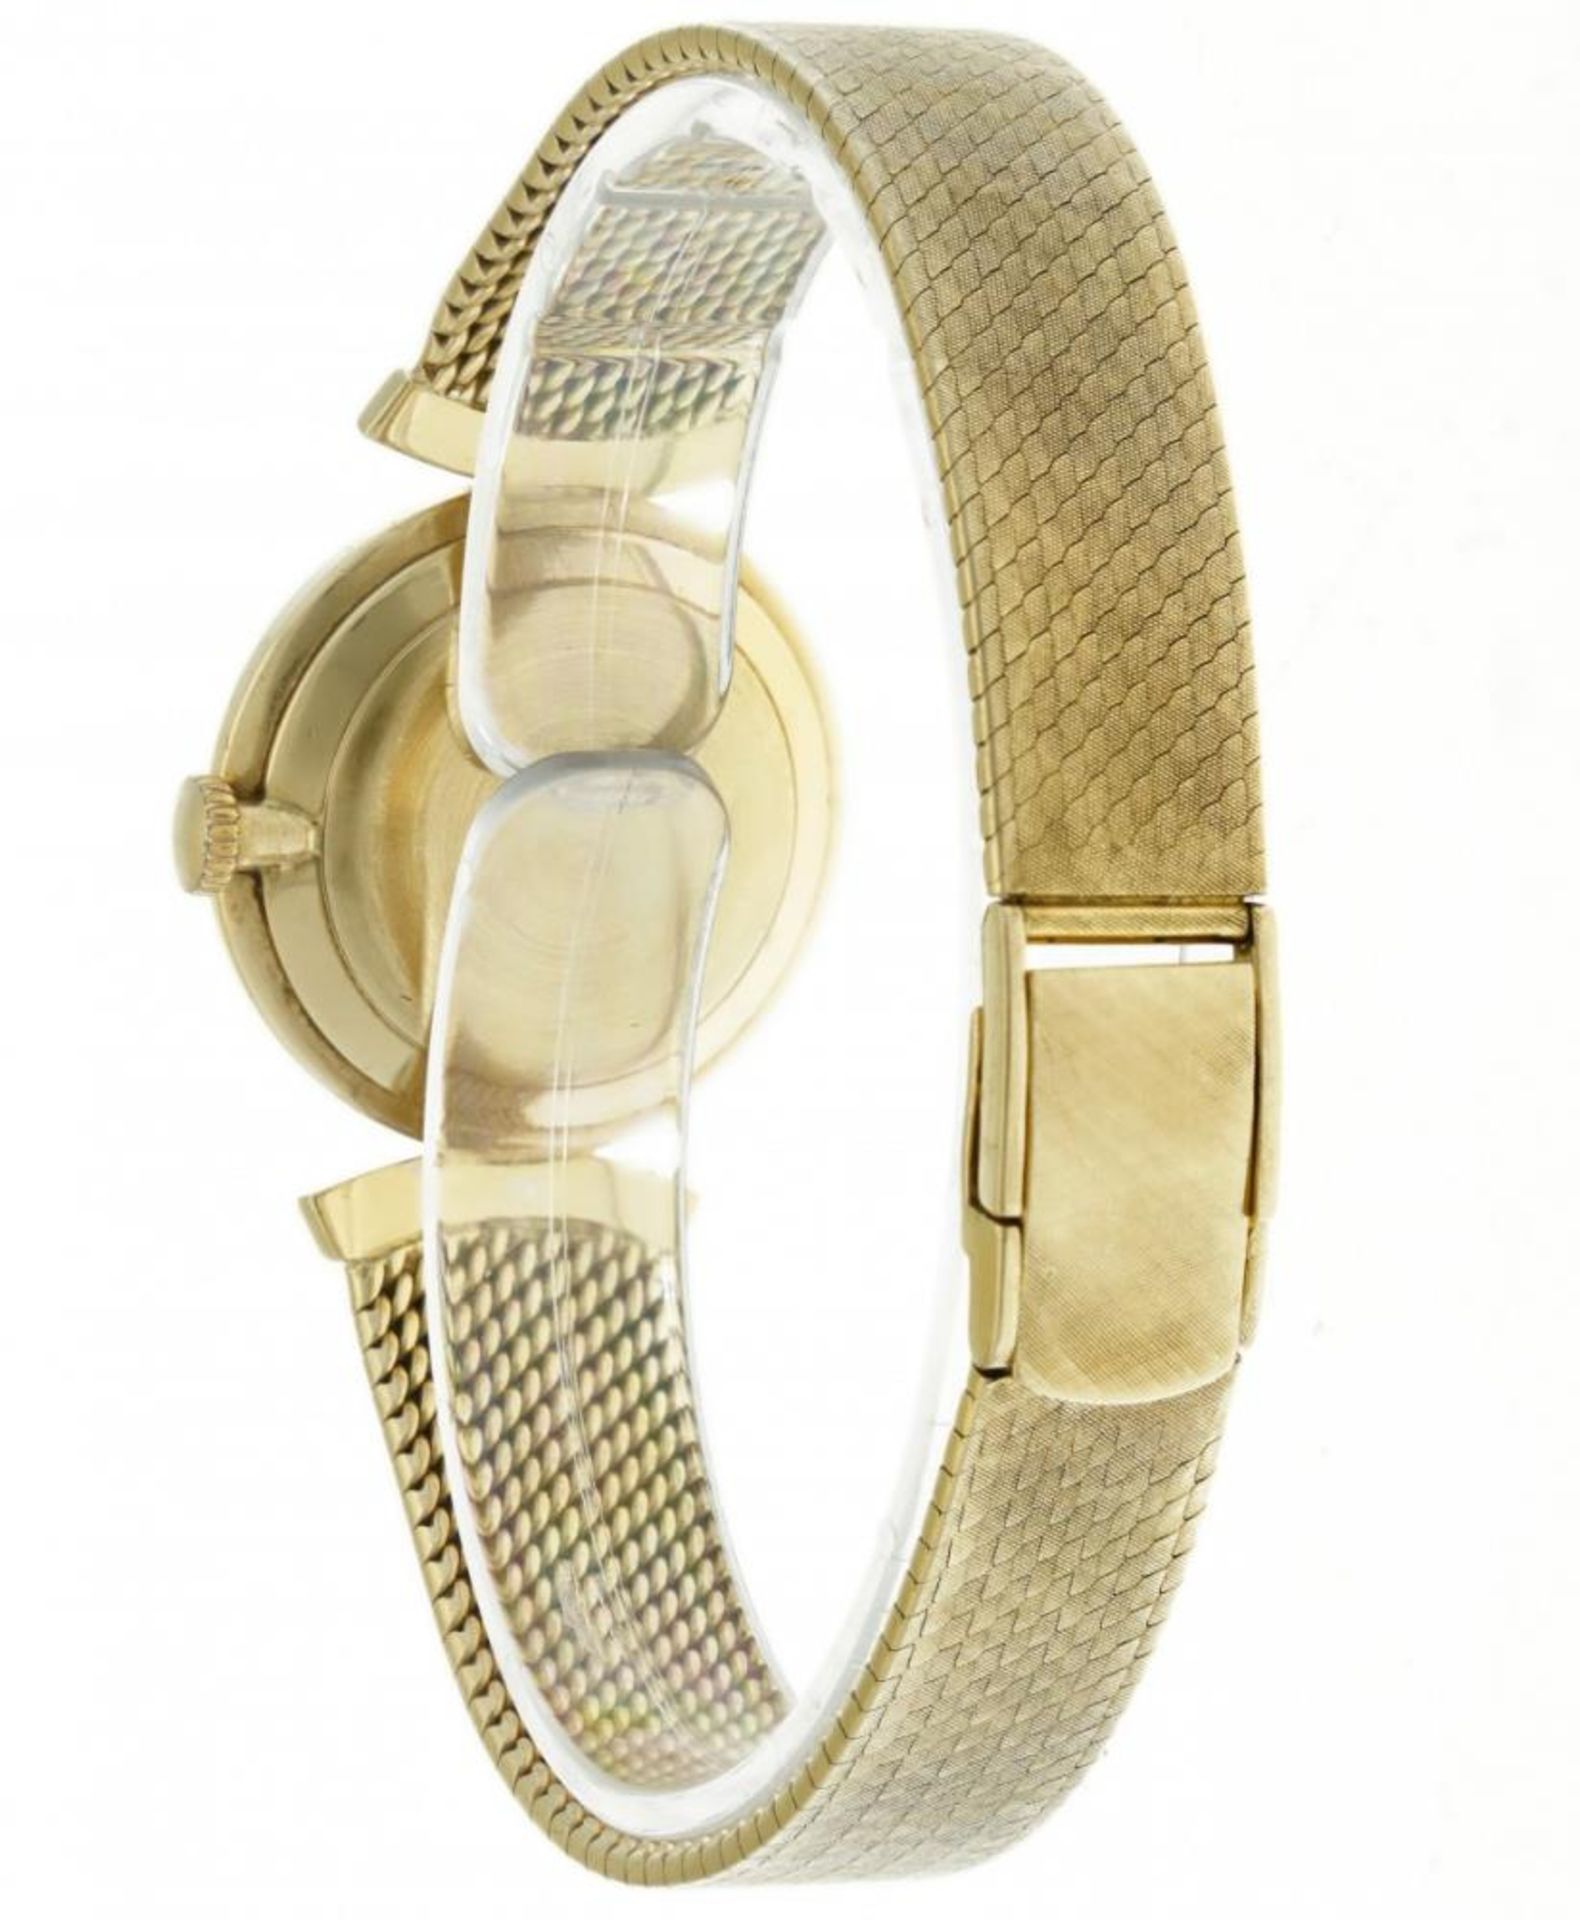 Chopard - Ladies watch - approx. 1970. - Image 5 of 10